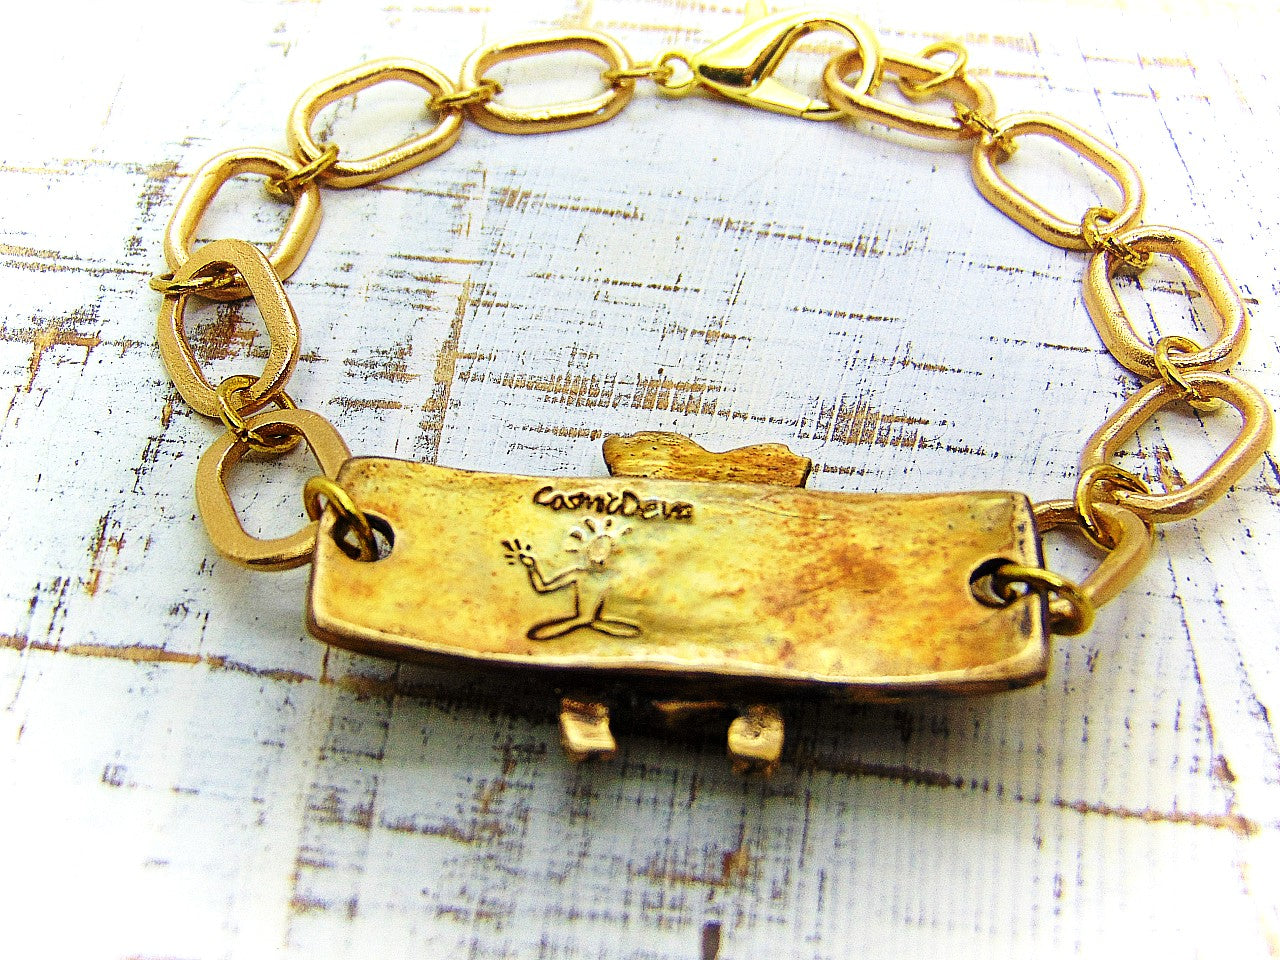 “Bee strong, Bee You, Bee Harmony” - Crafted with love and precision in our cozy Southeast Alabama home studio, this beautiful honeybee bracelet is a true work of art.  Each element, from the radiant recycled pure gold bronze honeybee charm tag to the intricate oval chain links, is individually meticulously handcrafted, hand carved and kiln fired, ensuring a piece that is as unique as it is elegant.